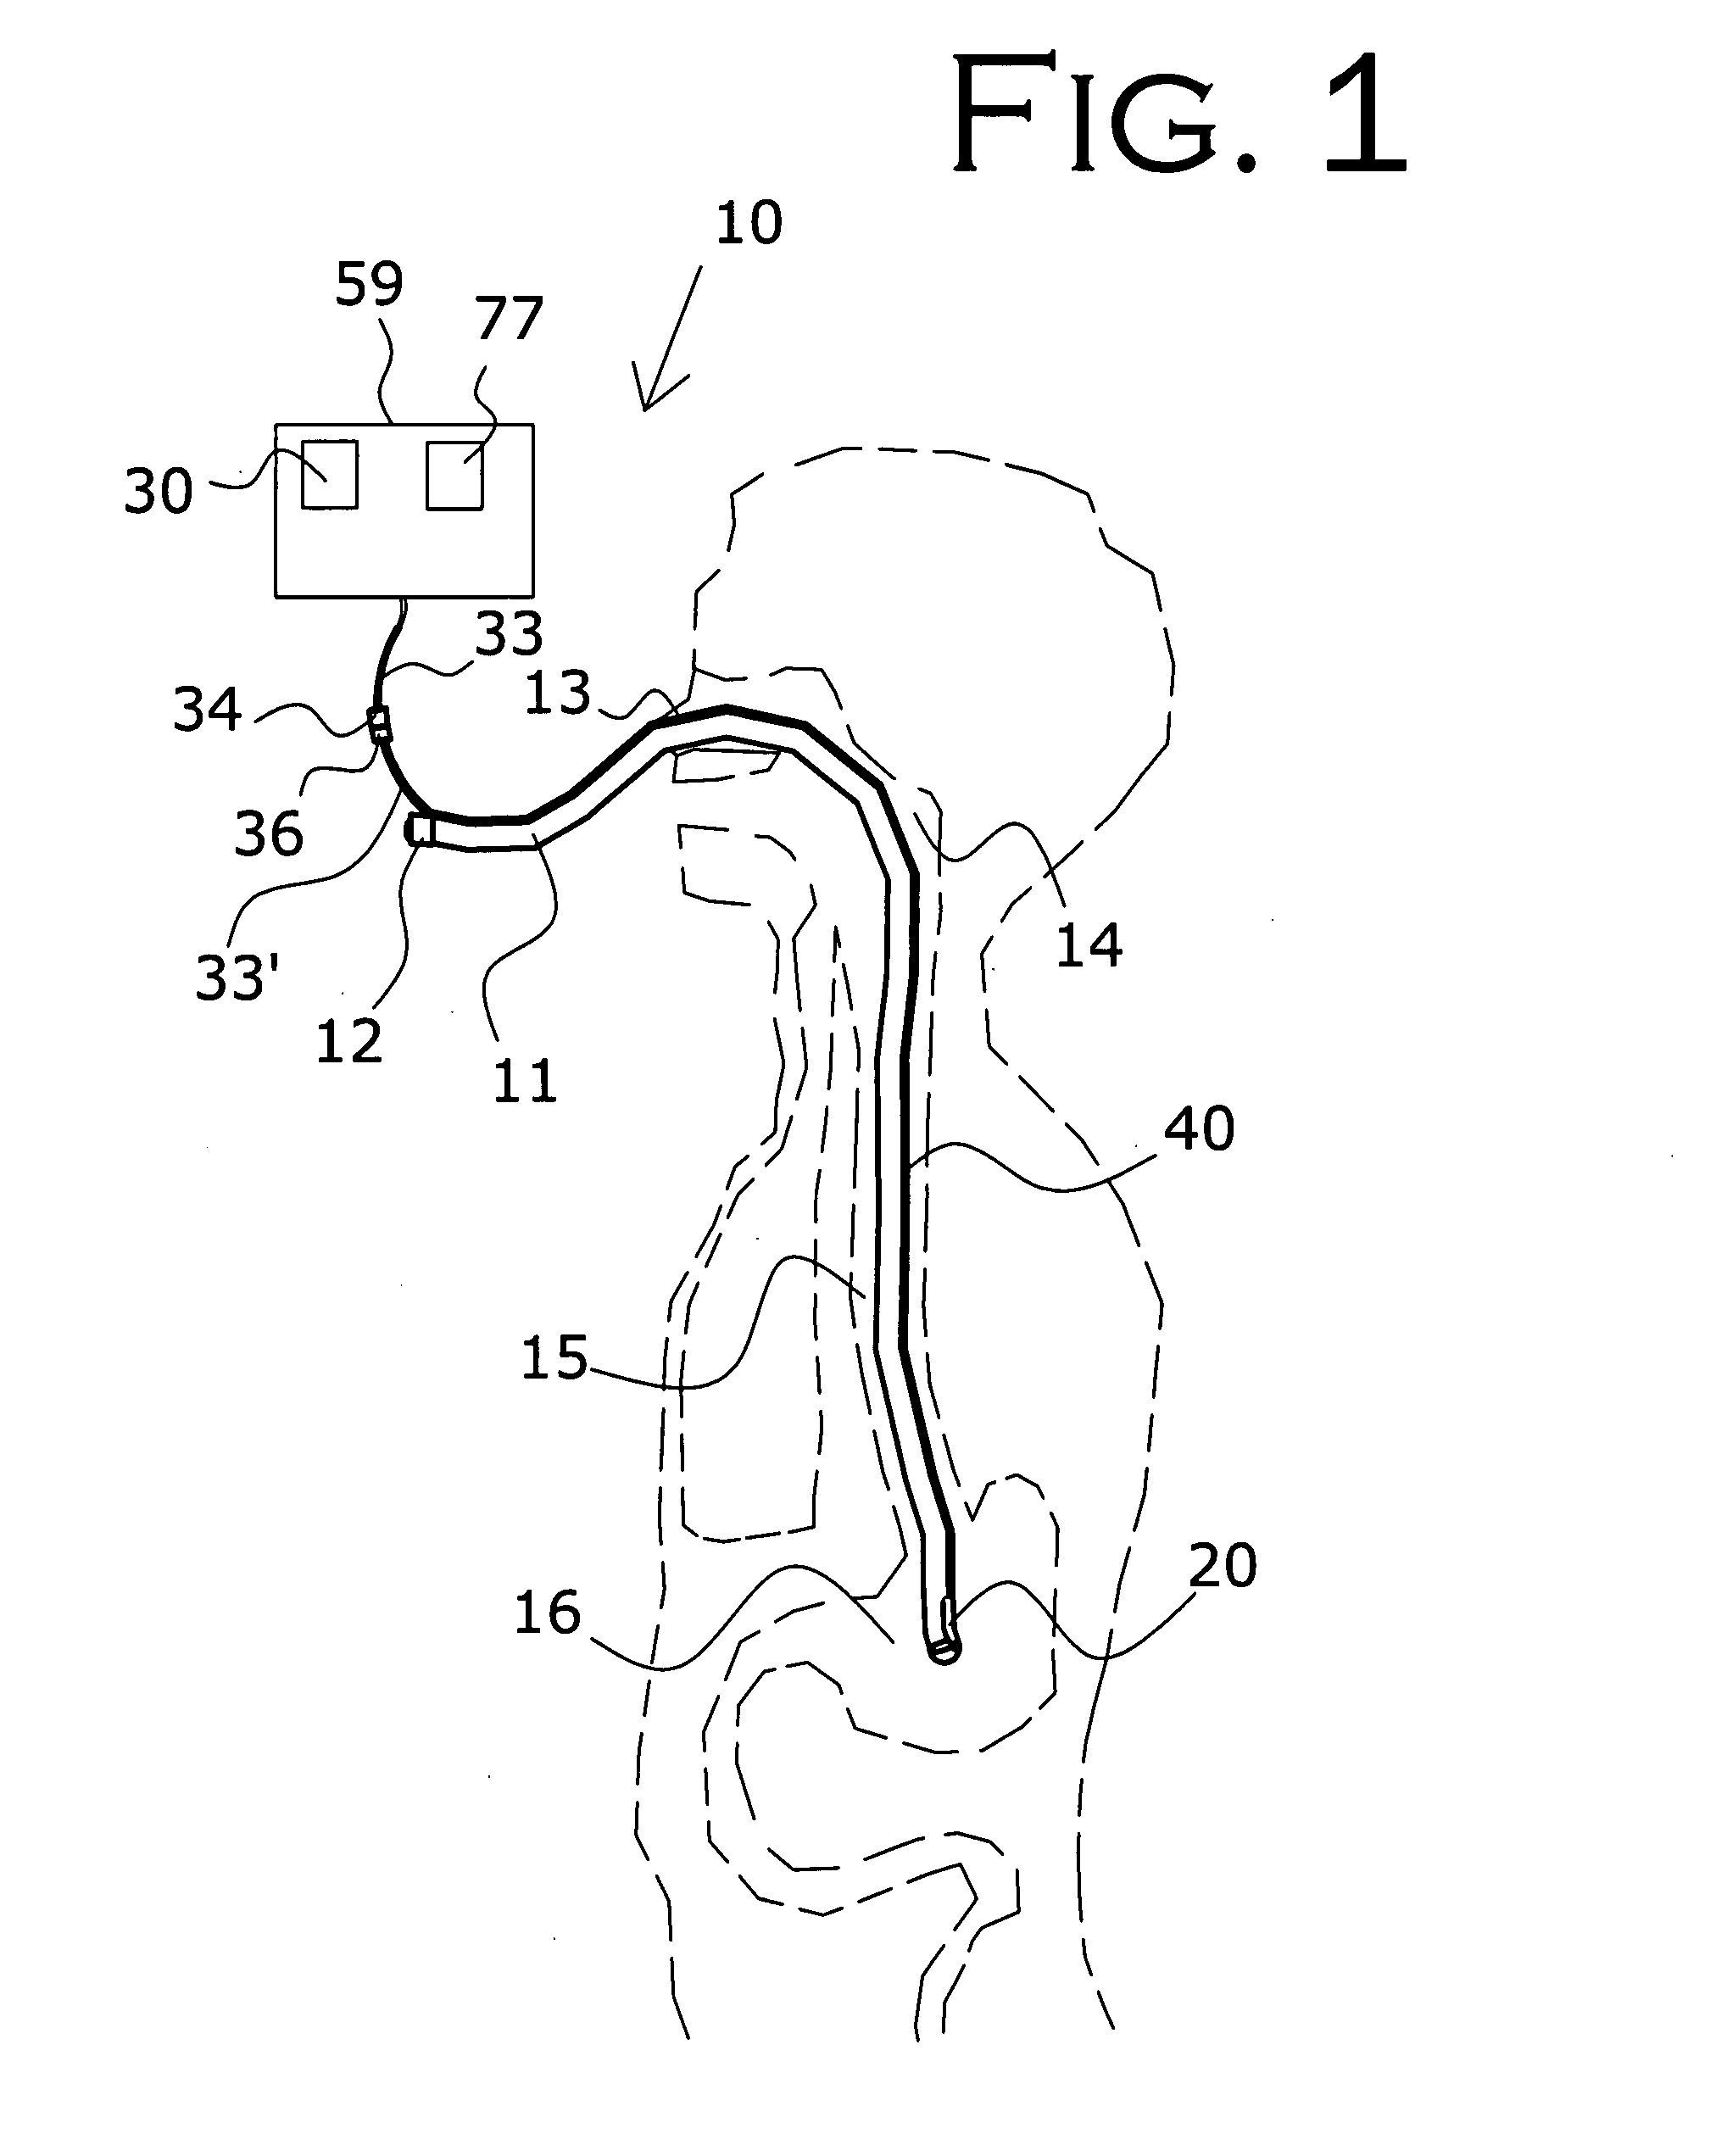 Nasogastric tube placement and monitoring system